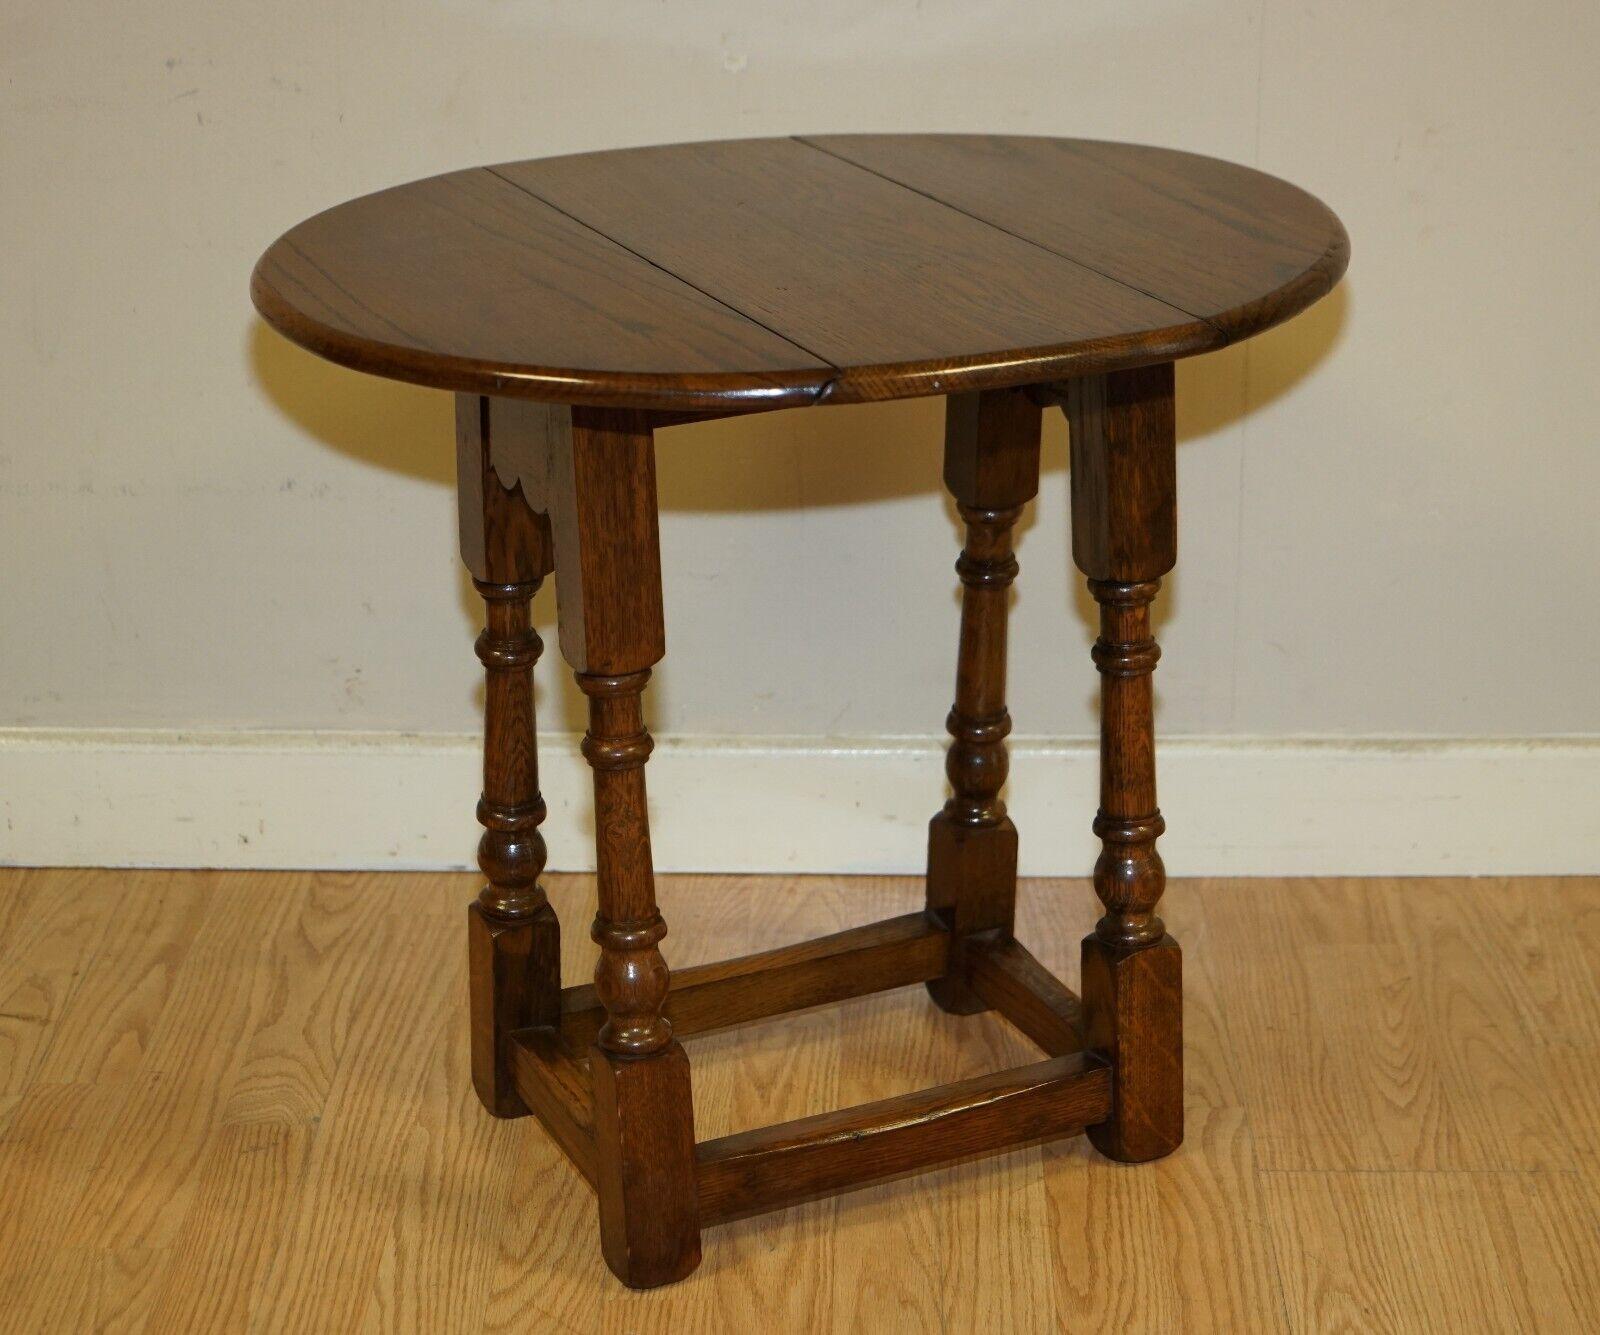 Here we have for sale this lovely well-made small vintage drop leaf, folding side, end, sofa, table. This table has multiple uses, perfect at the end of the sofa for a glass of wine, to stand a lamp or plant. It has been waxed and polished and ready